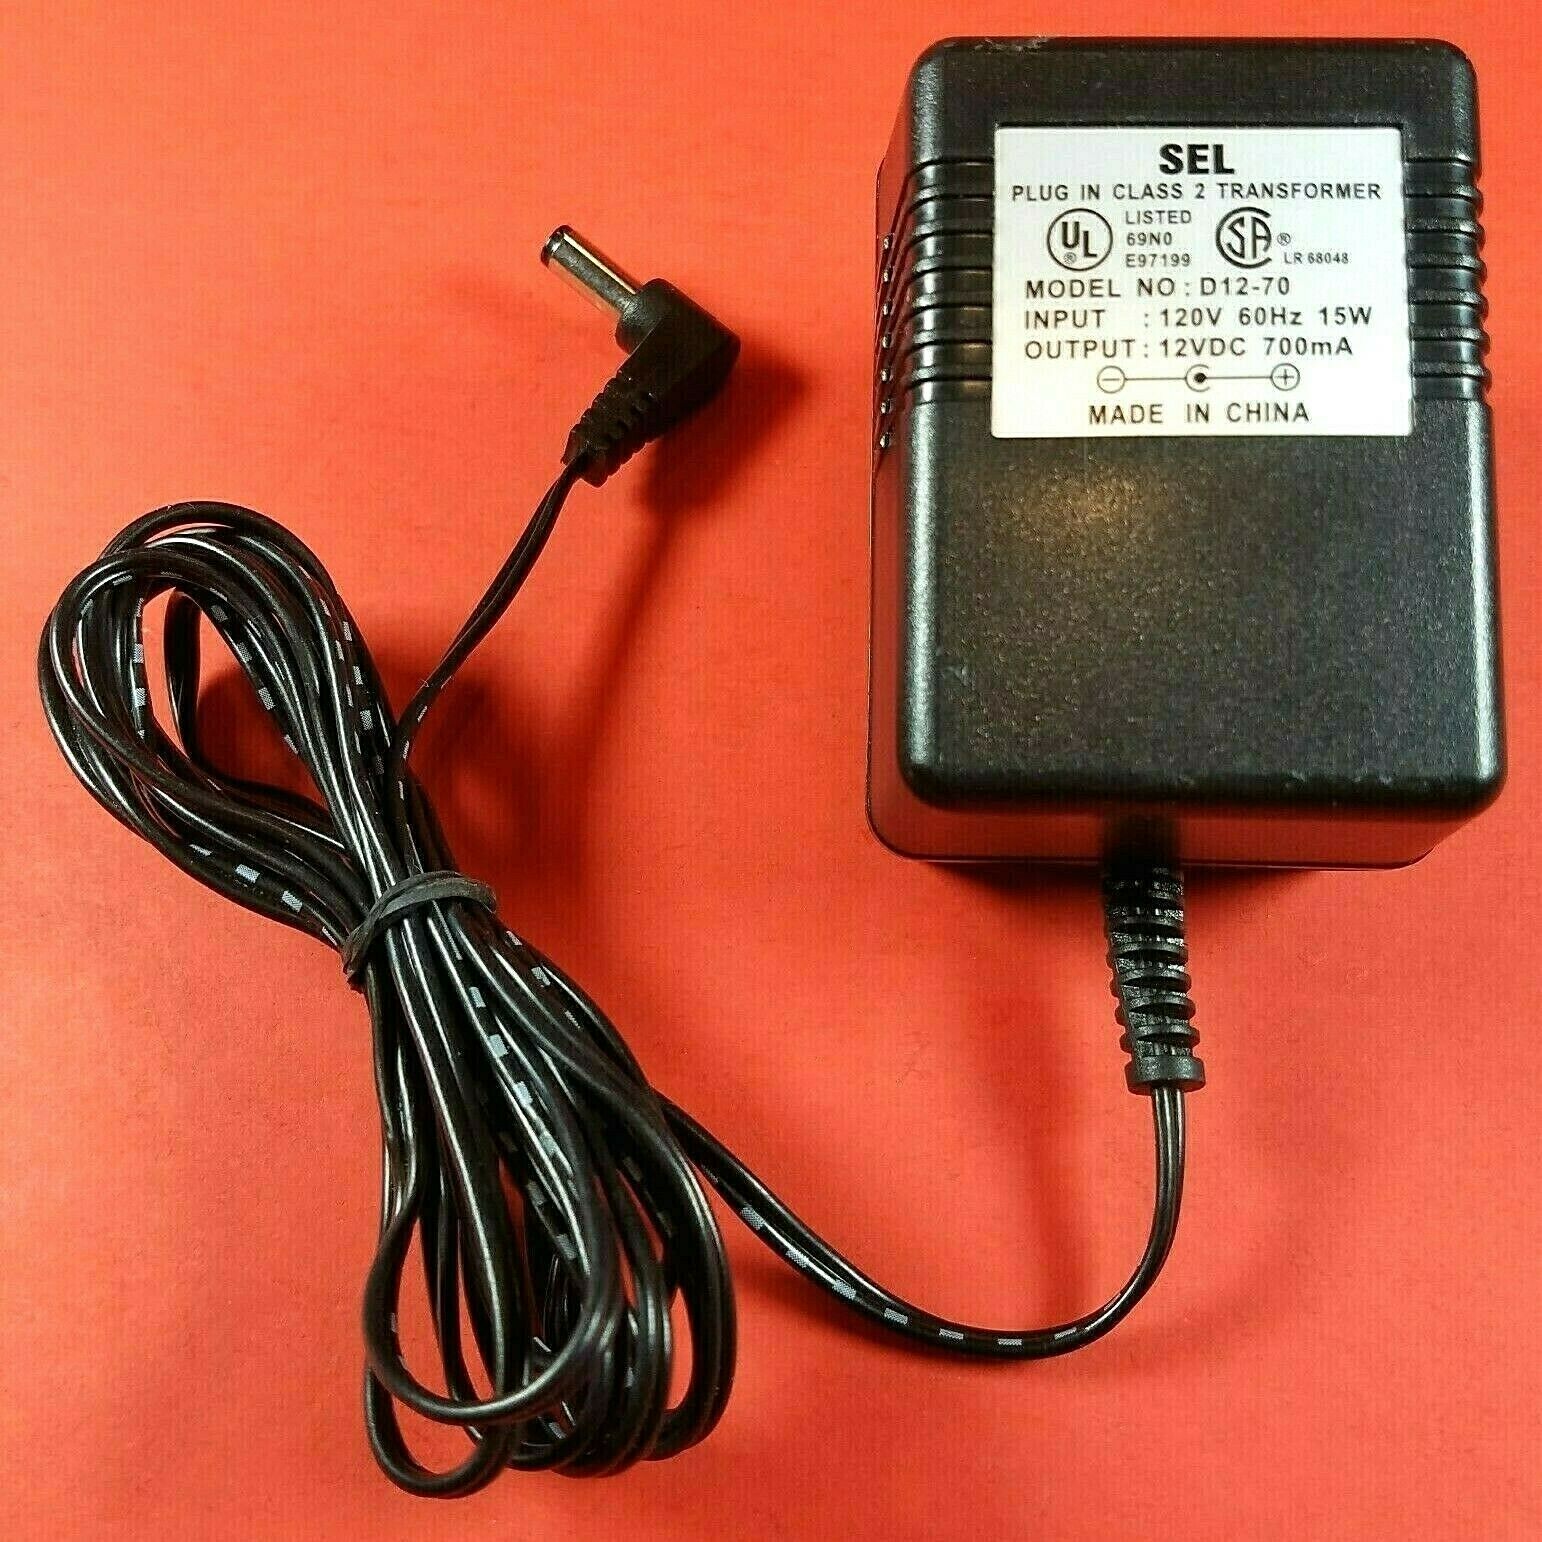 Genuine SEL D12-70 Power Supply Adaptor 12V - 700mA OEM AC/DC Adapter Charger SEL Plug In Class 2 Transformer Model N